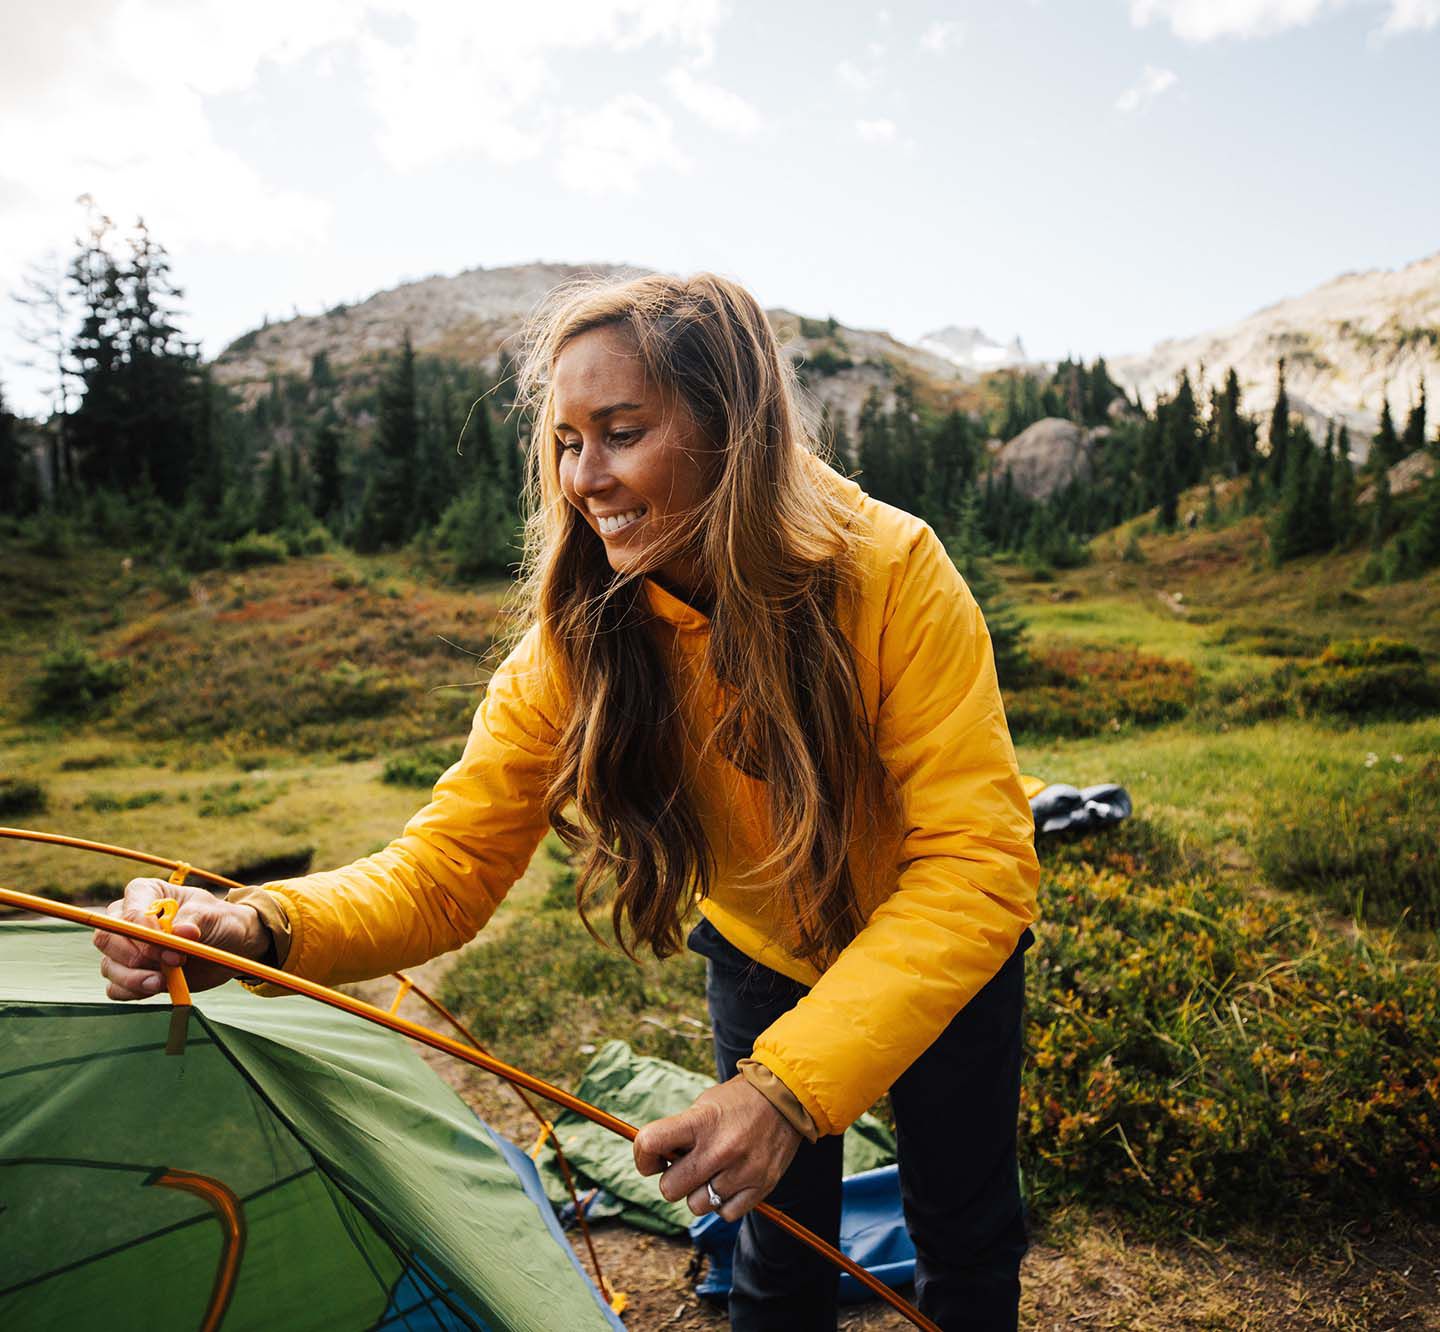 Marmot: Outdoor Clothing & Gear Made for Adventure